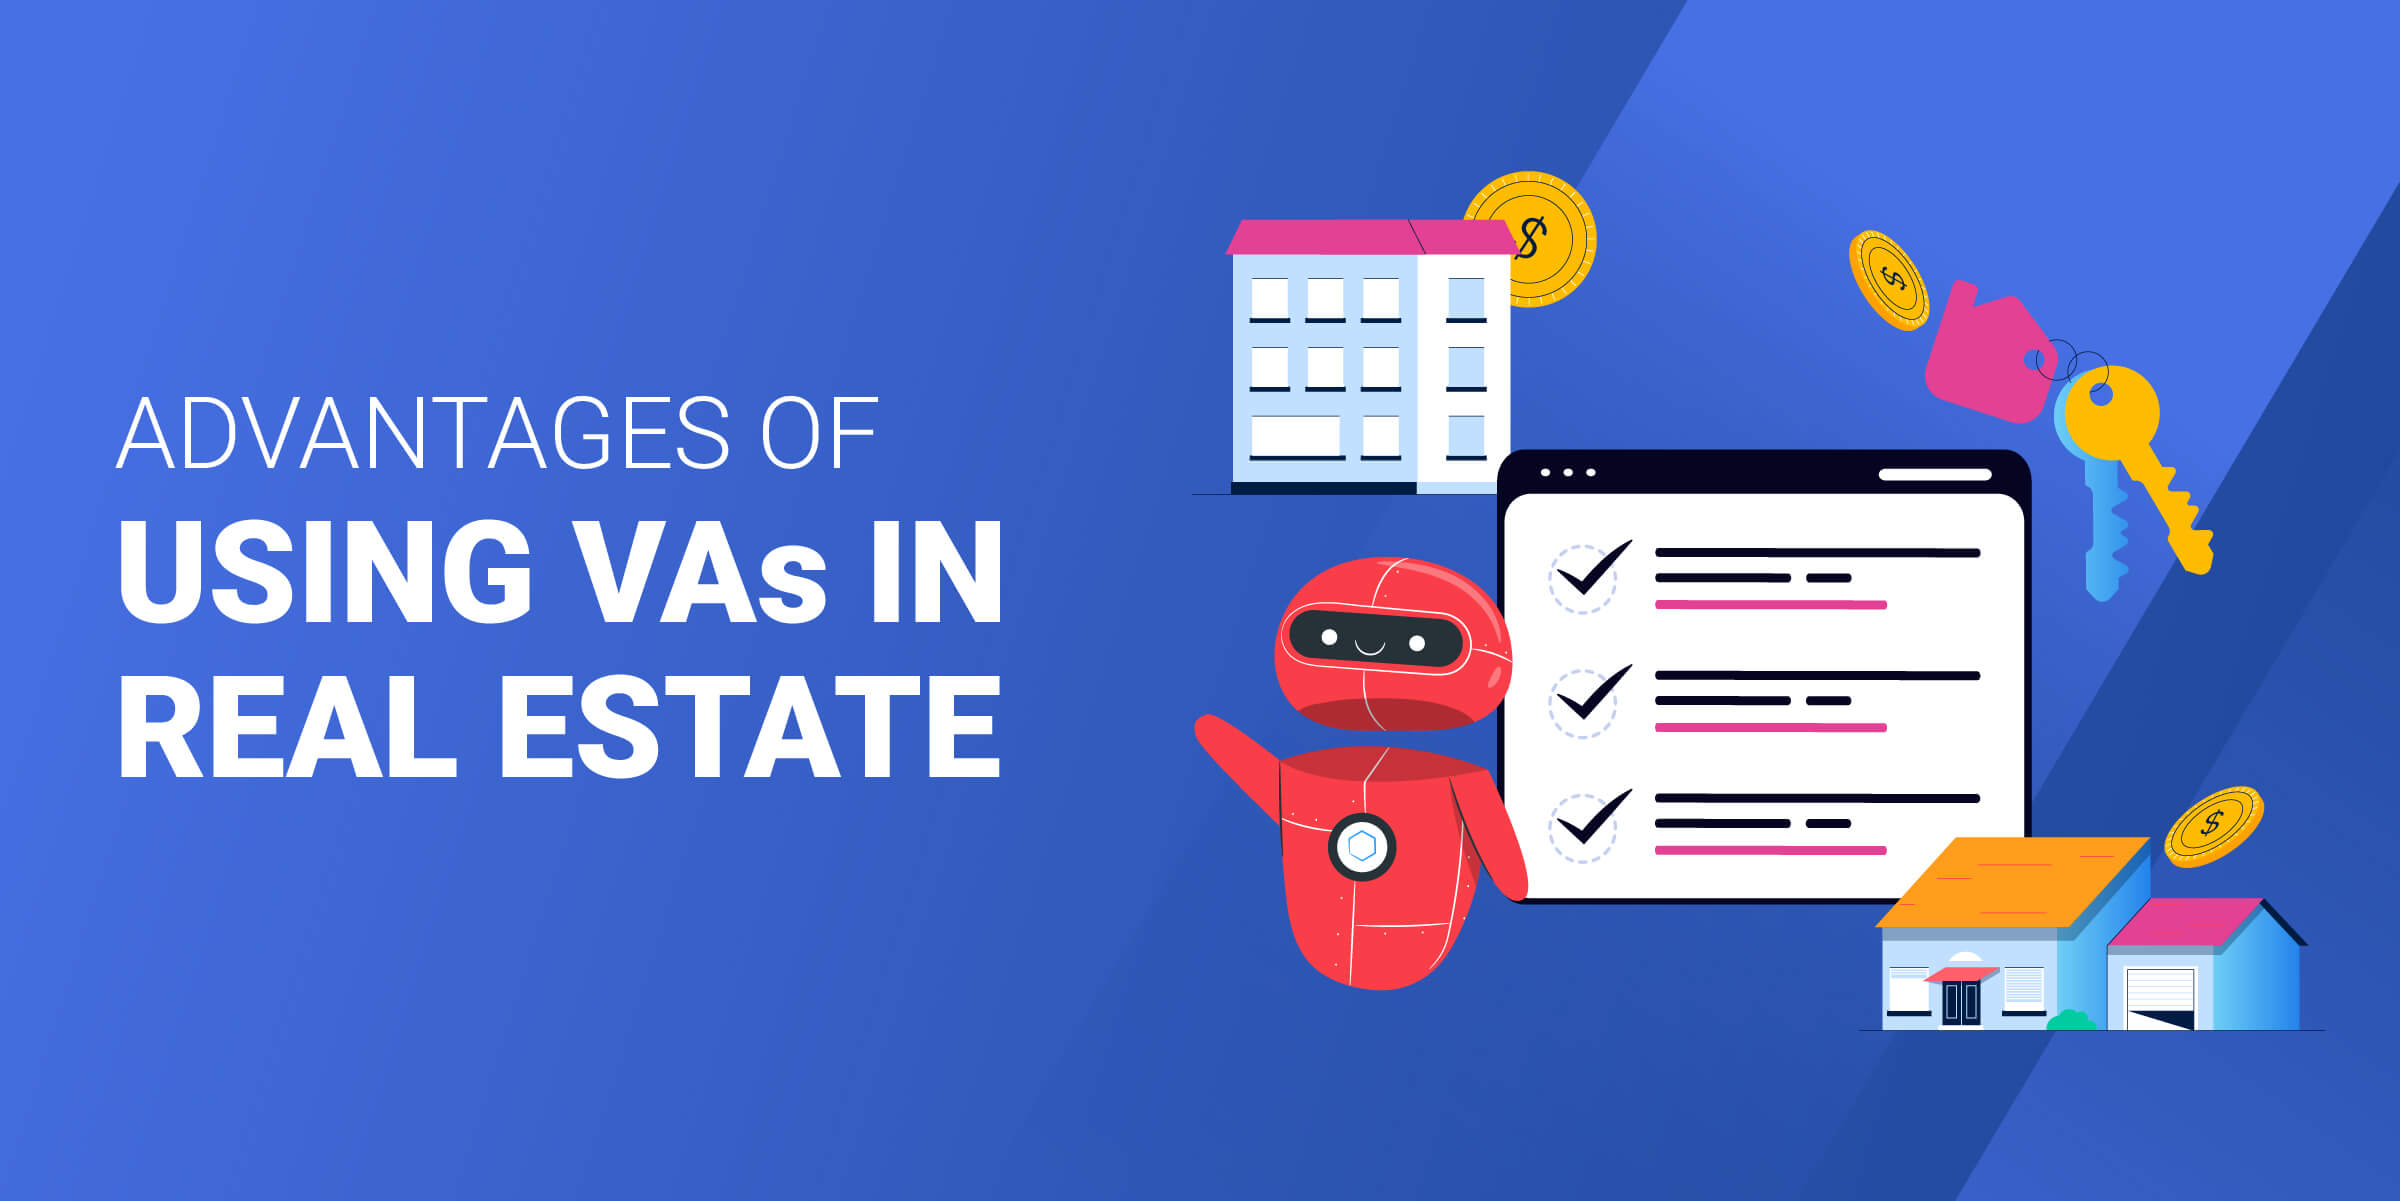 Advantages of Using VAs in Real Estate